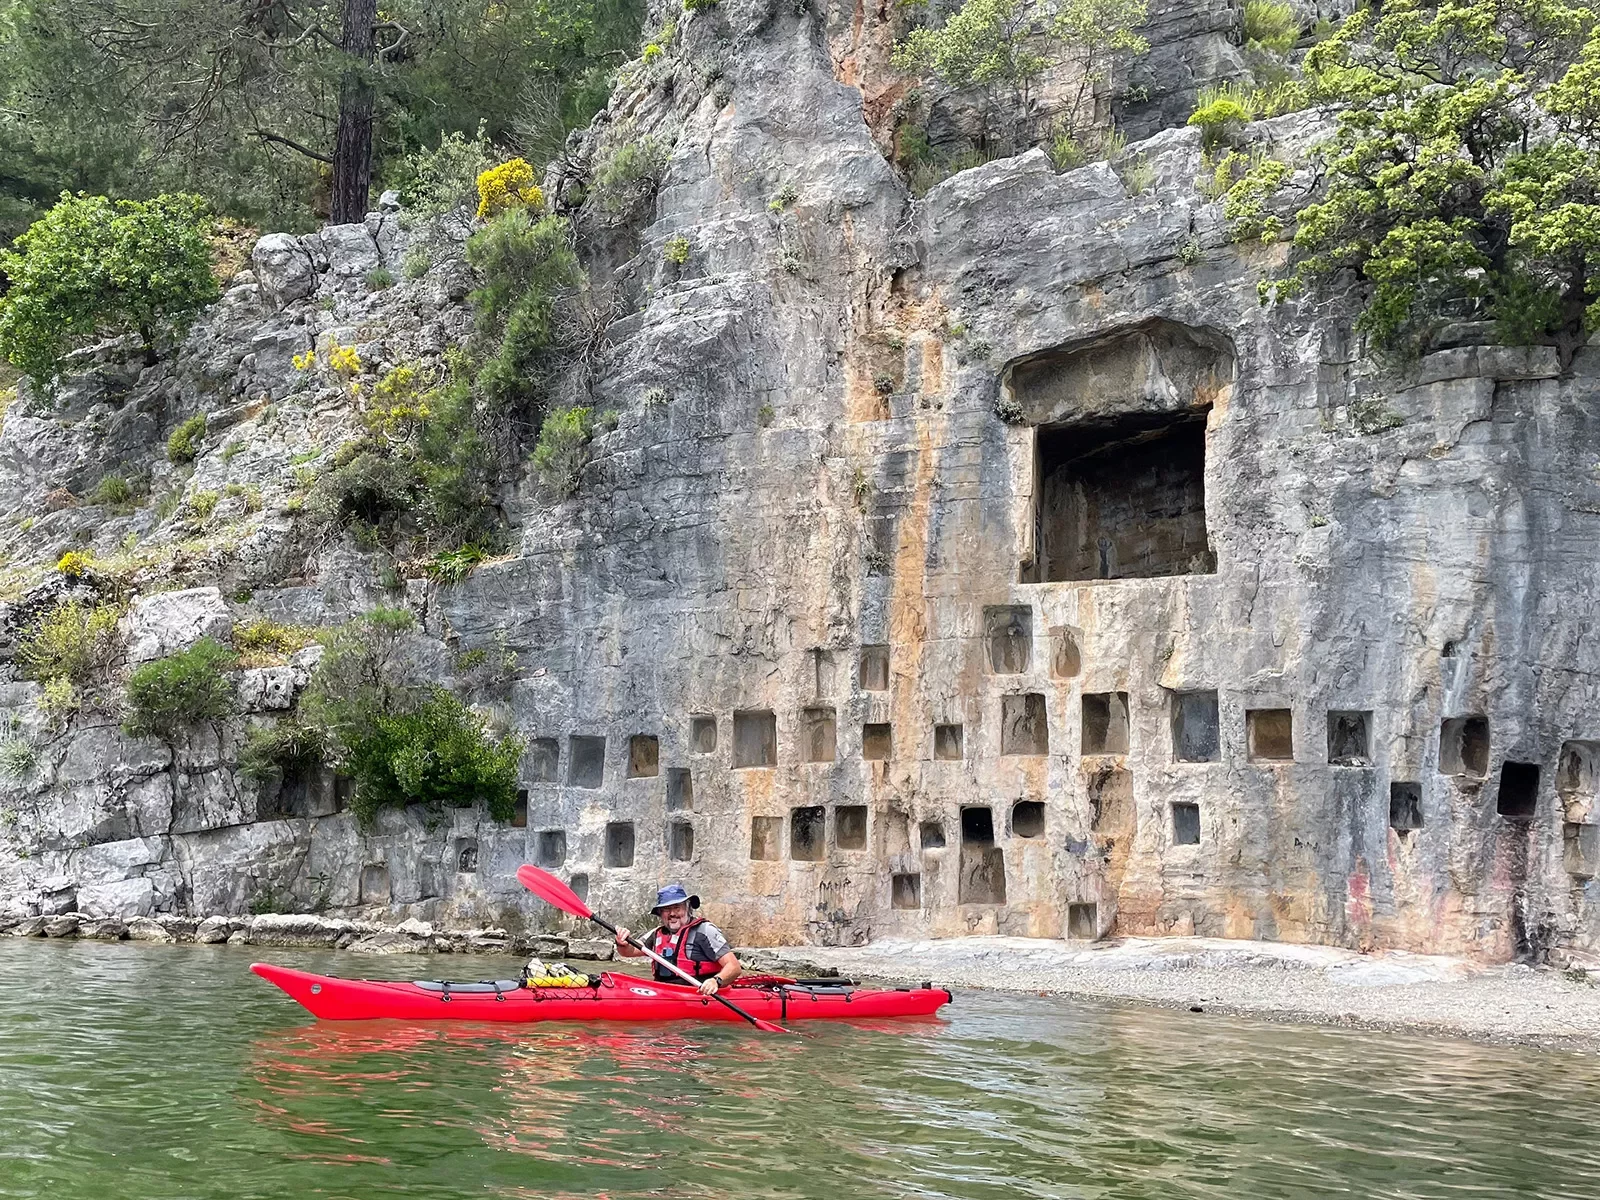 Guest in red kayak, bored out rock wall with square holes behind him.